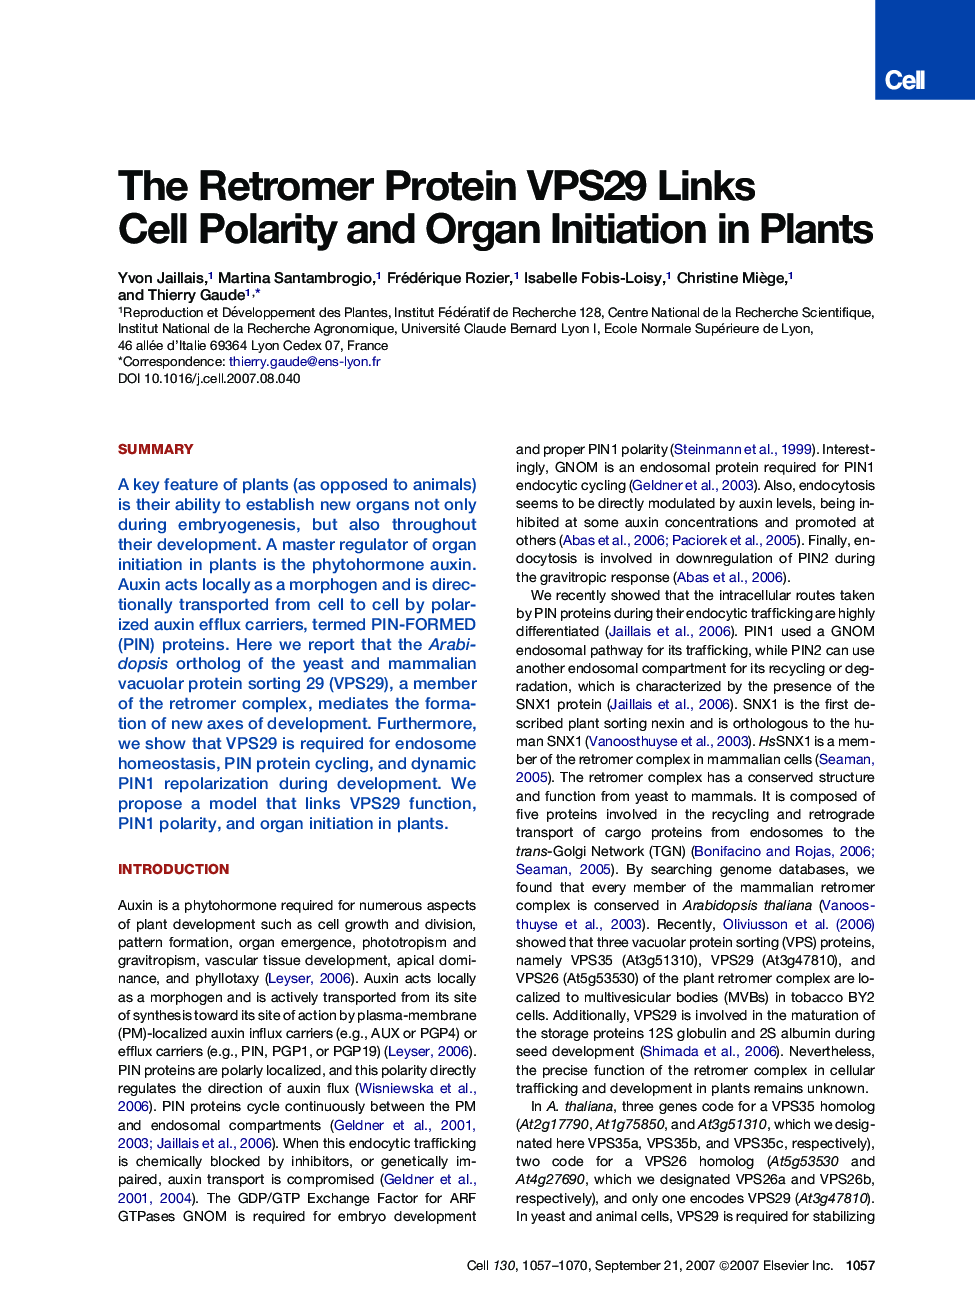 The Retromer Protein VPS29 Links Cell Polarity and Organ Initiation in Plants